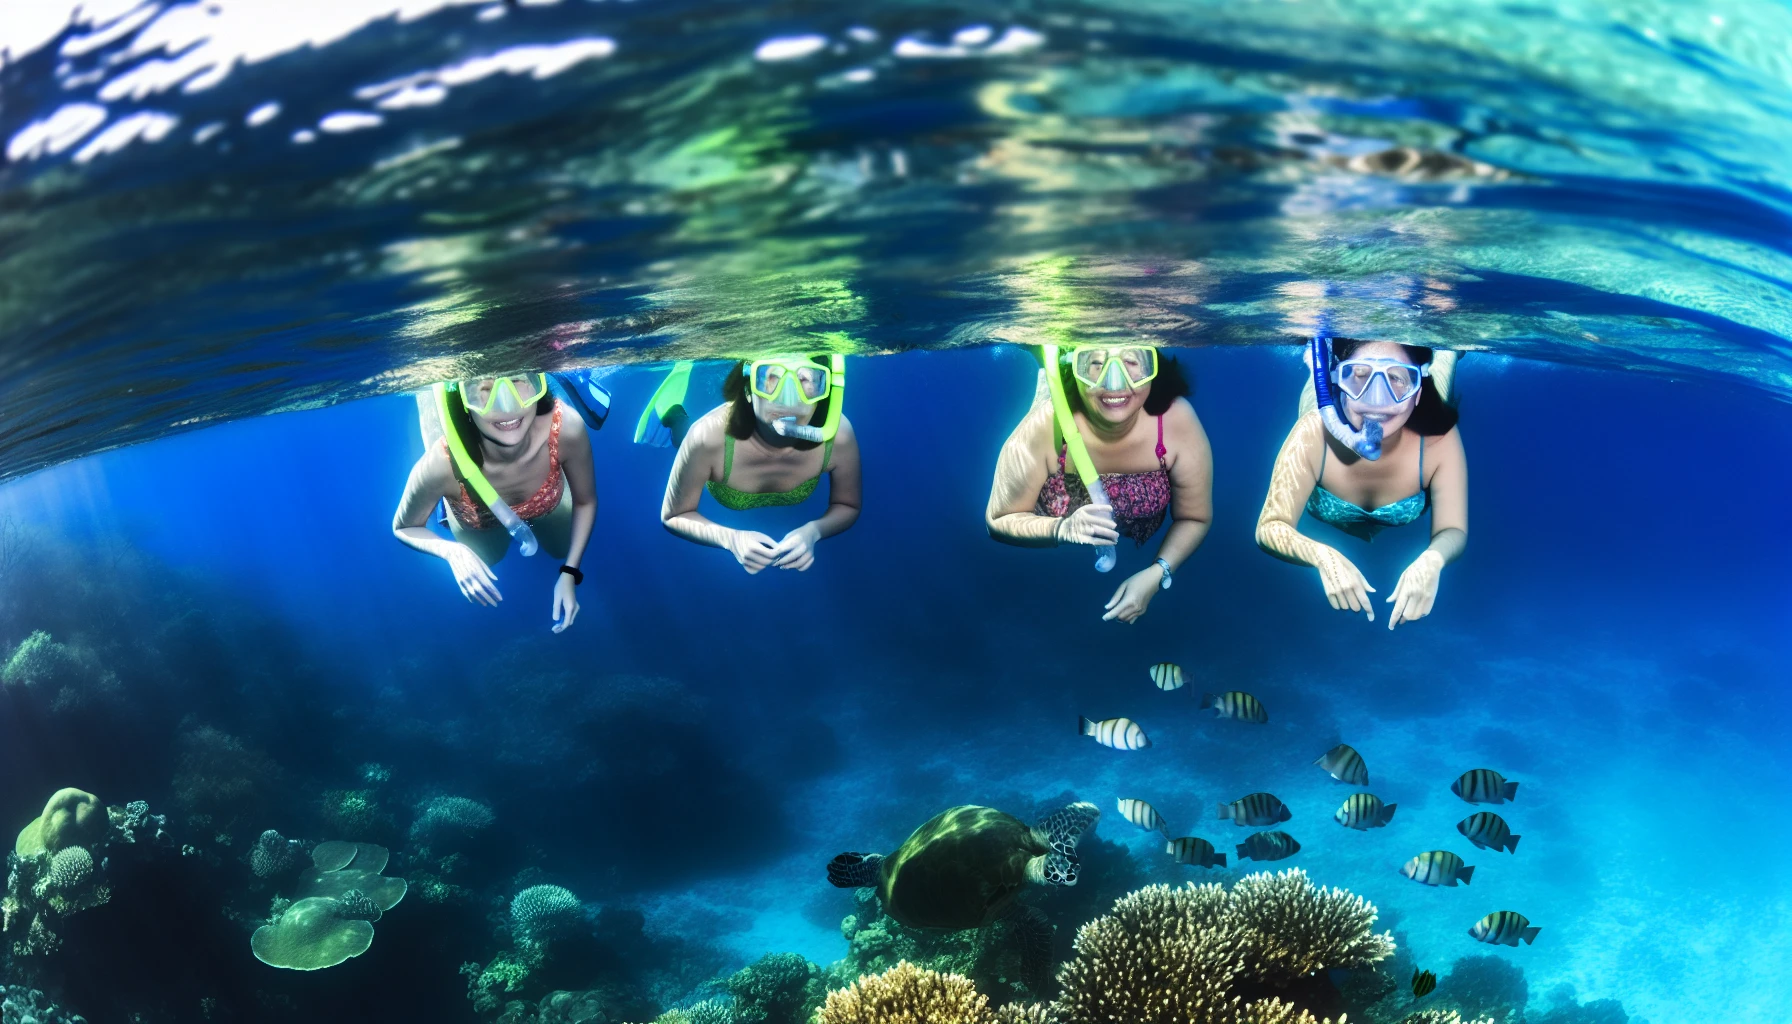 Snorkeling adventure in the crystal-clear waters of Playa Conchal